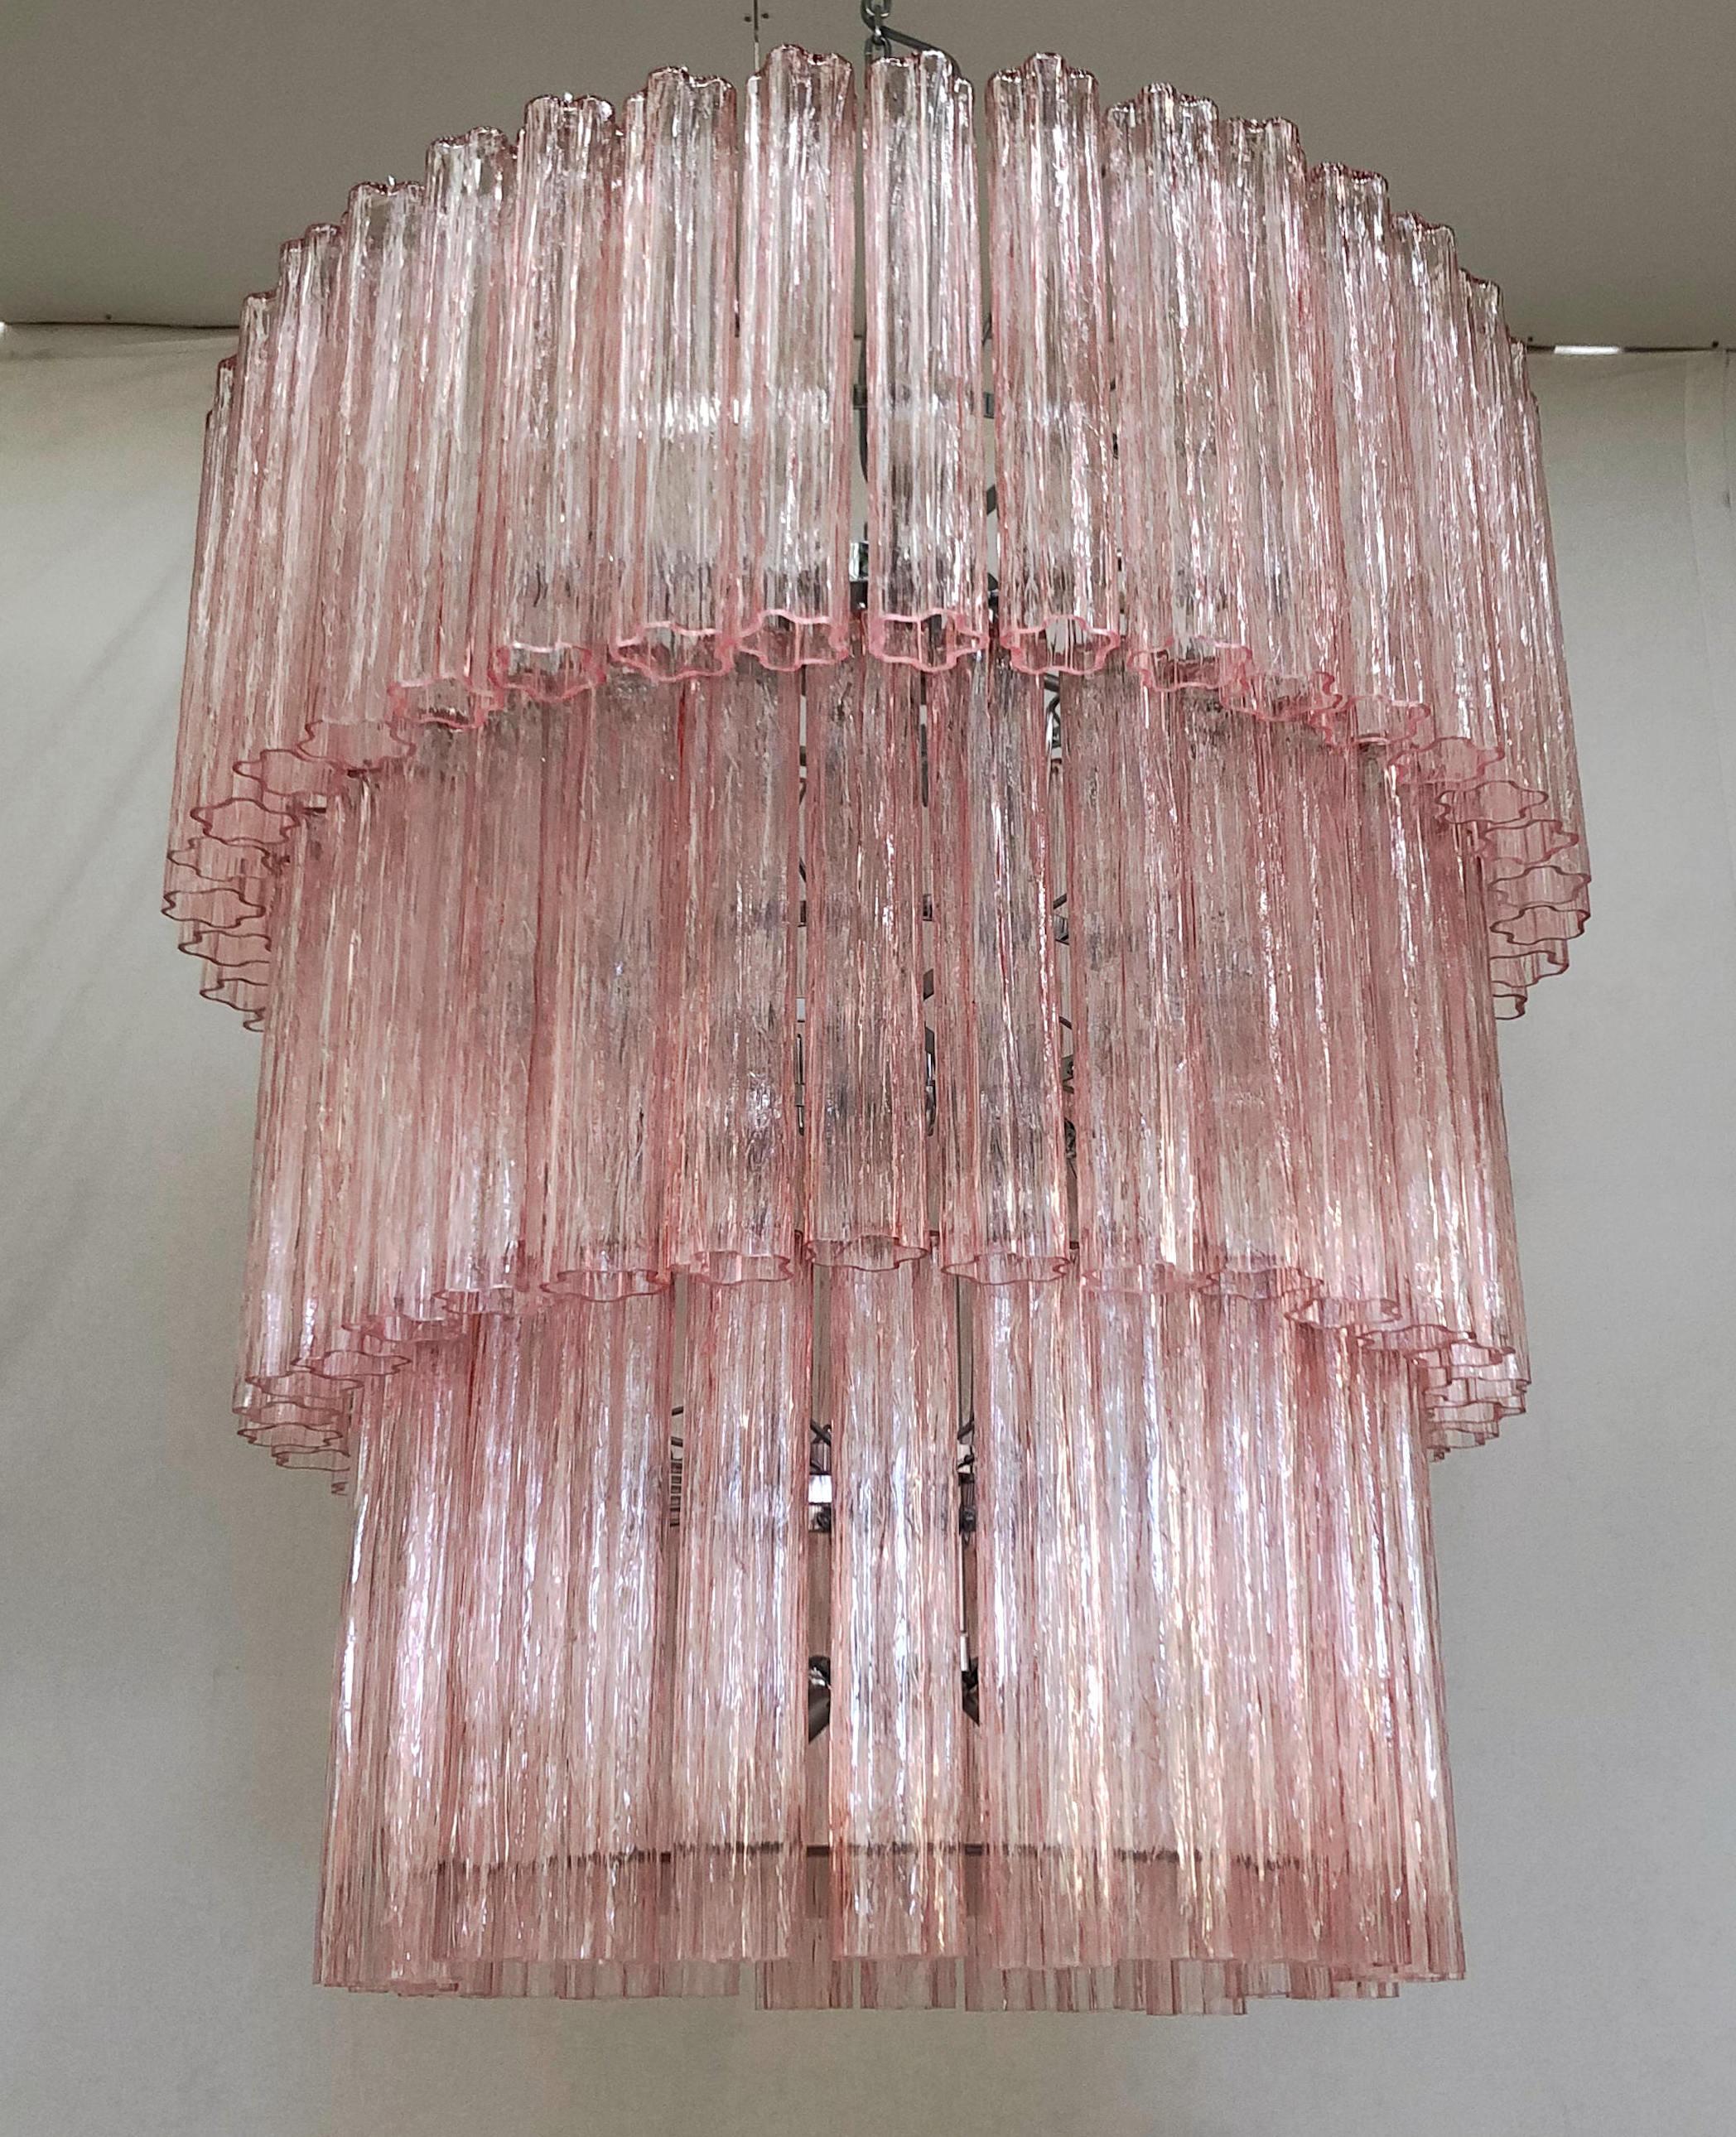 Italian chandelier shown in pink hand blown Murano Tronchi glasses arranged in 3 tiers, mounted on polished chrome finish metal frame with a frosted pink glass diffuser at the bottom / Designed by Fabio Bergomi for Fabio Ltd / Made in Italy
15